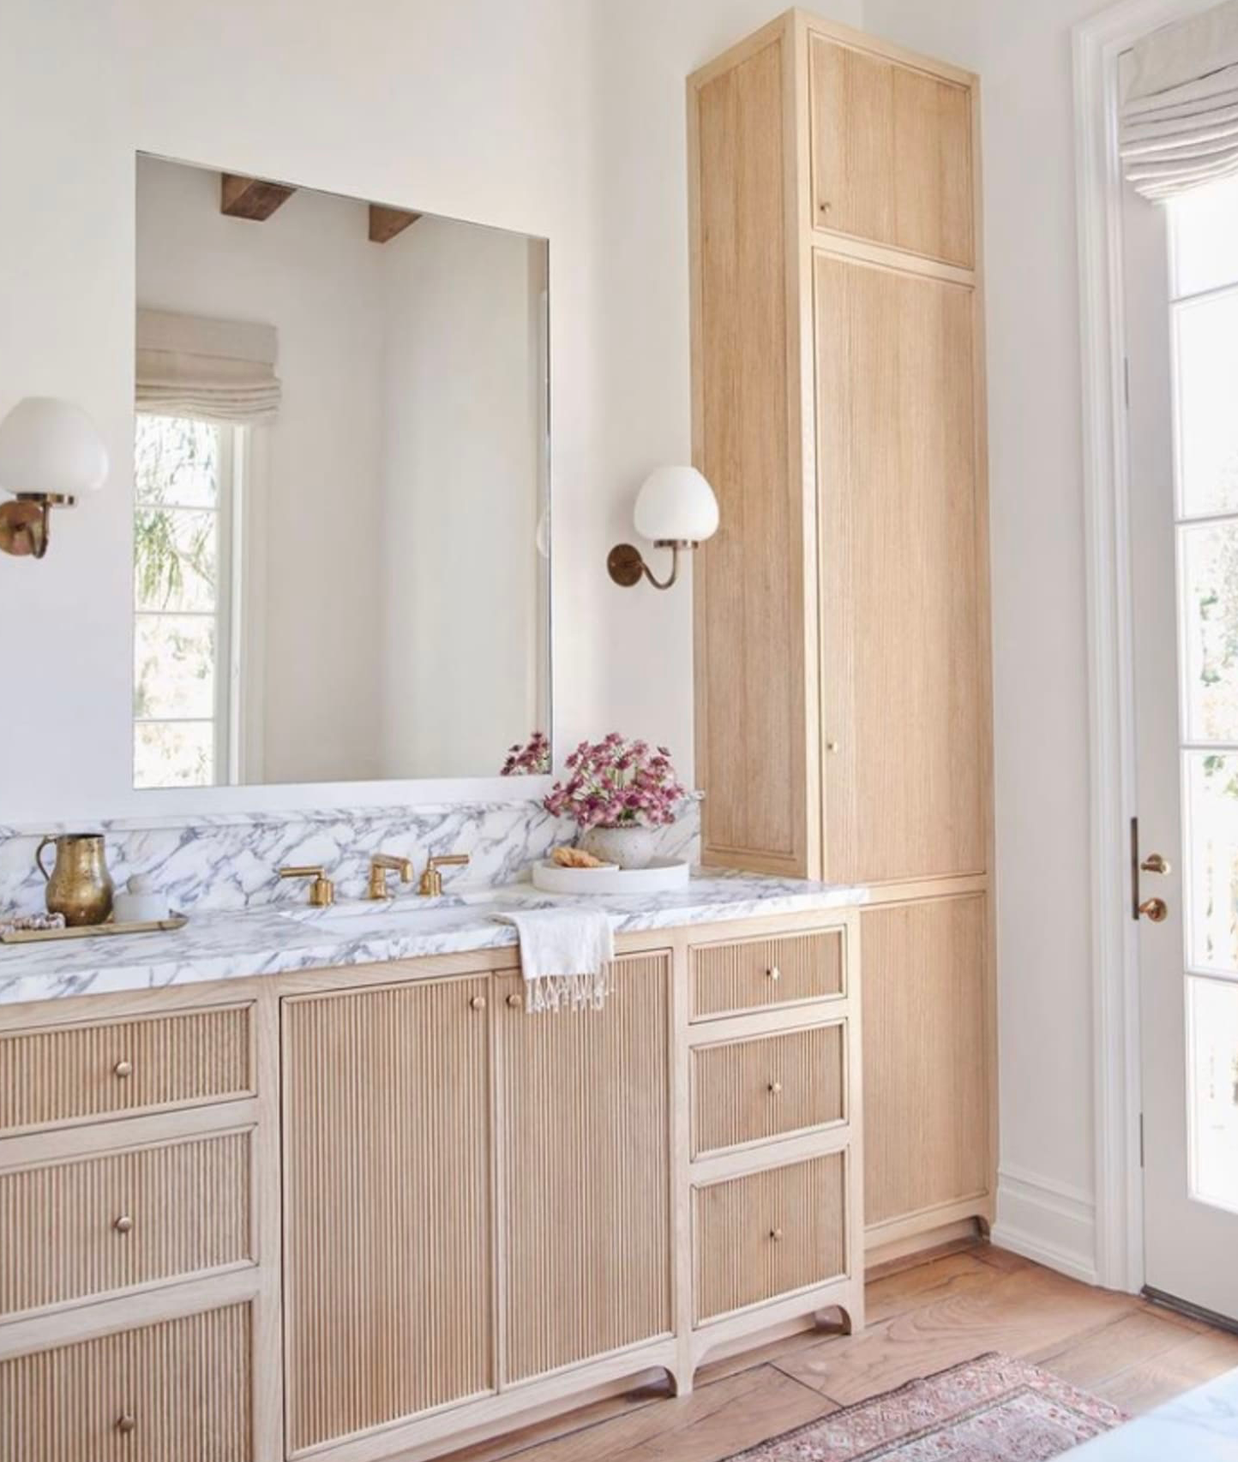 Reeded cabinets in a bathroom, with a light wooden color